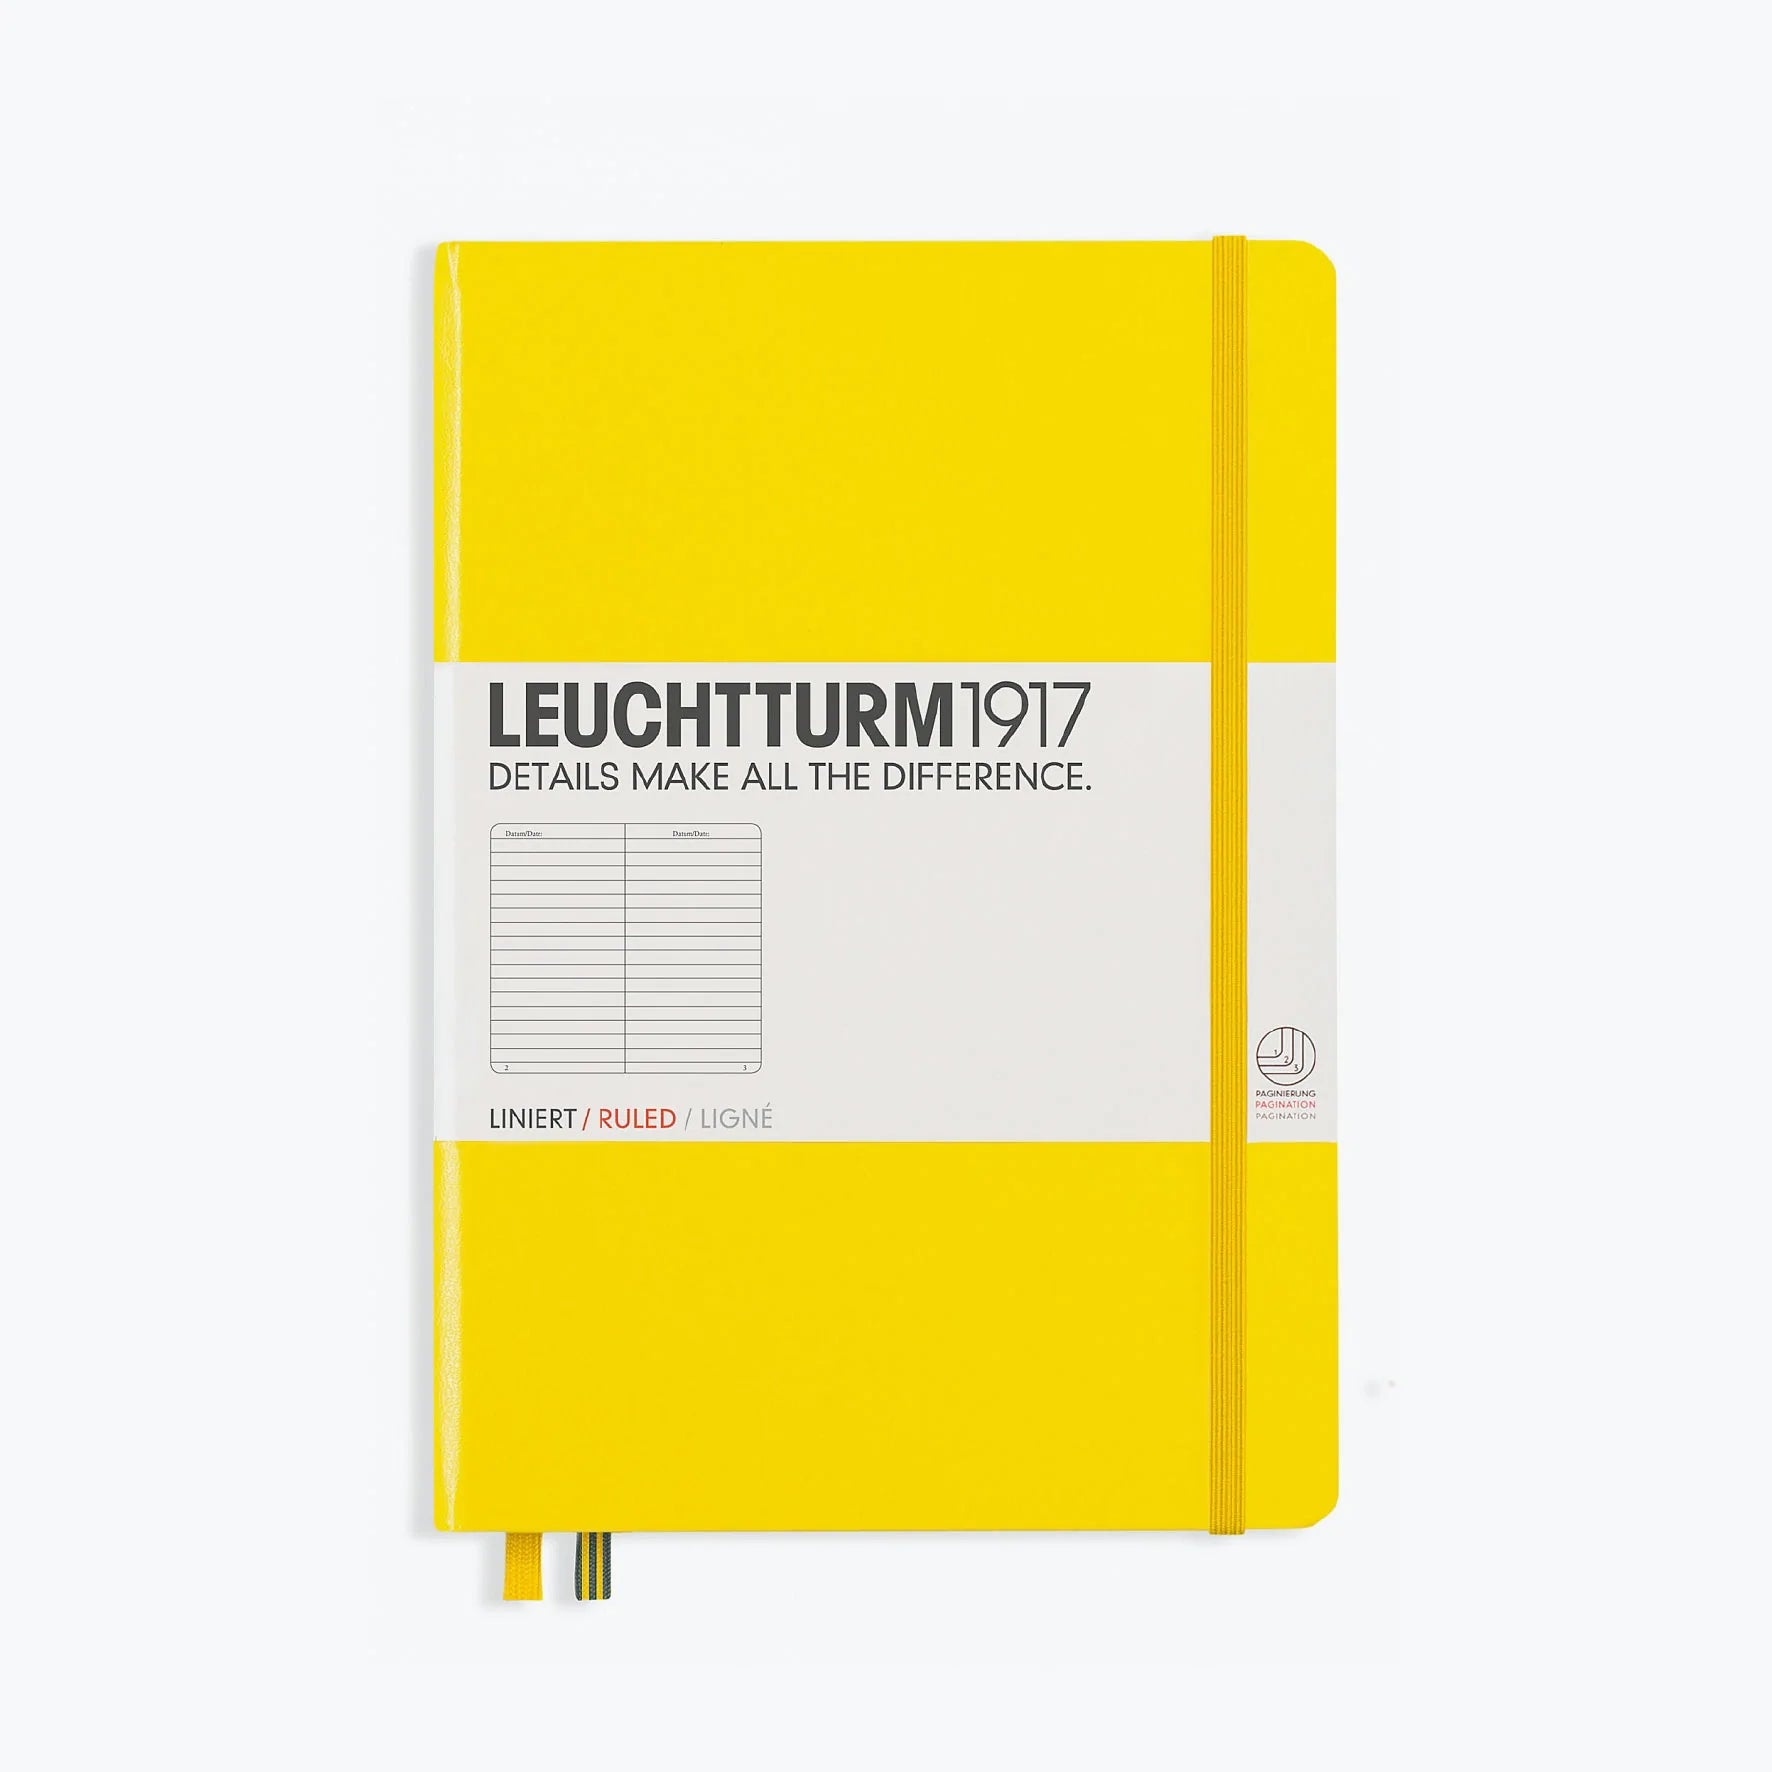 Leuchtturm1917 - Notebook - A5 - Lemon Notebooks The lemon Leuchtturm1917 A5 is a simple yet sophisticated notebook, making it an ideal companion for all walks of life. Leuchtturm1917 notebooks are designed very carefully down to the last detail. The page